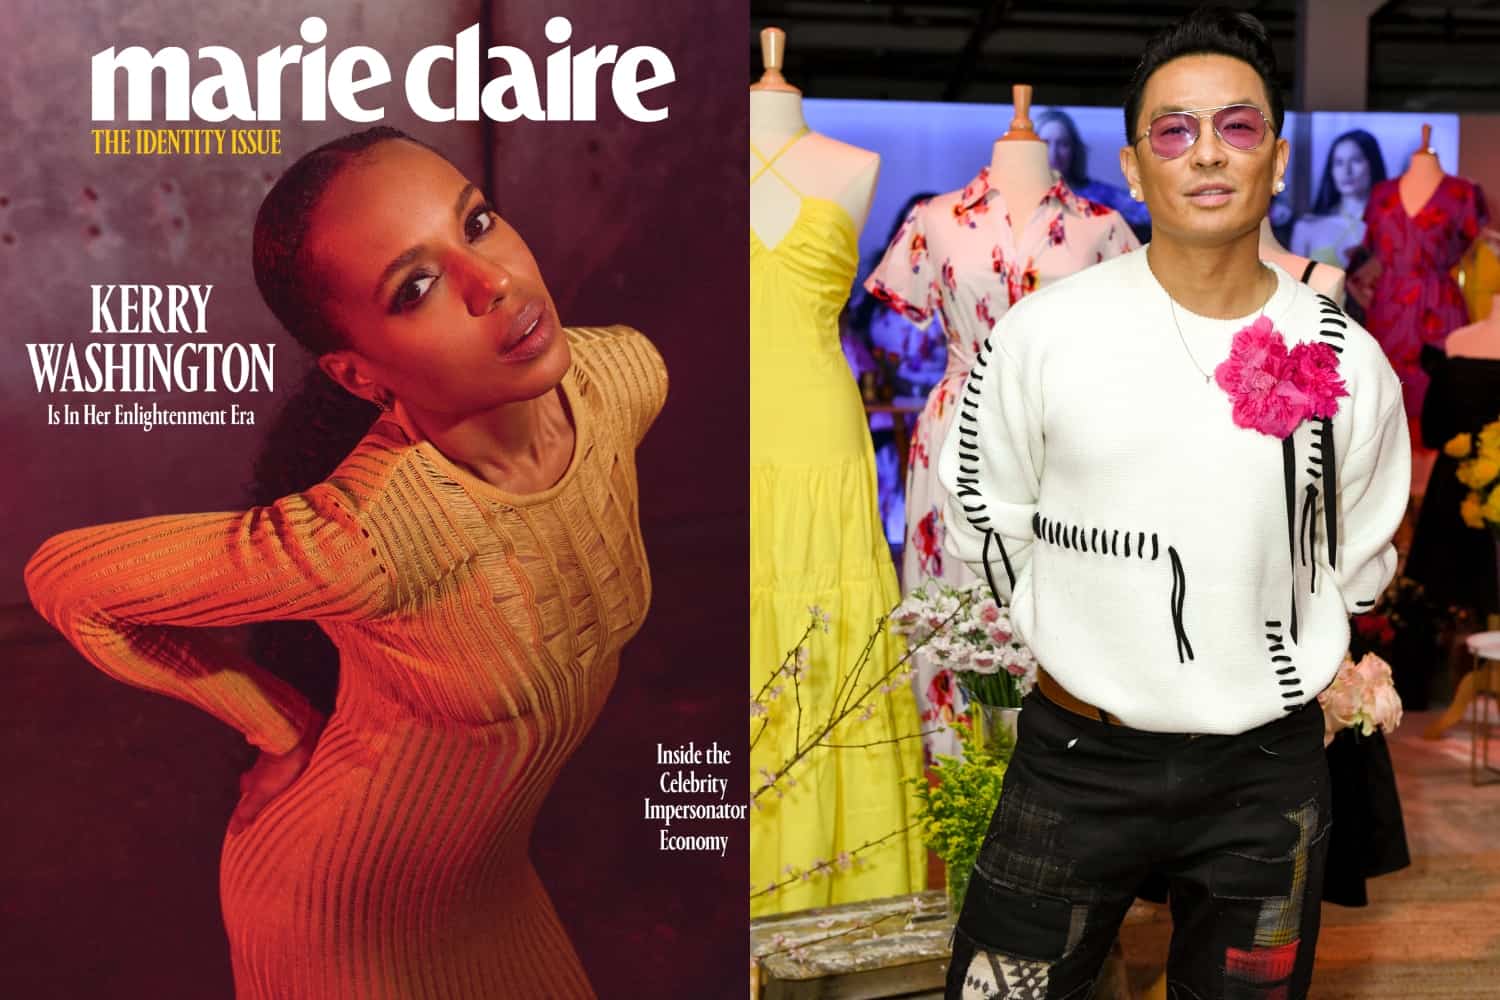 Kerry Washington Covers Marie Claire, Partying With Prabal